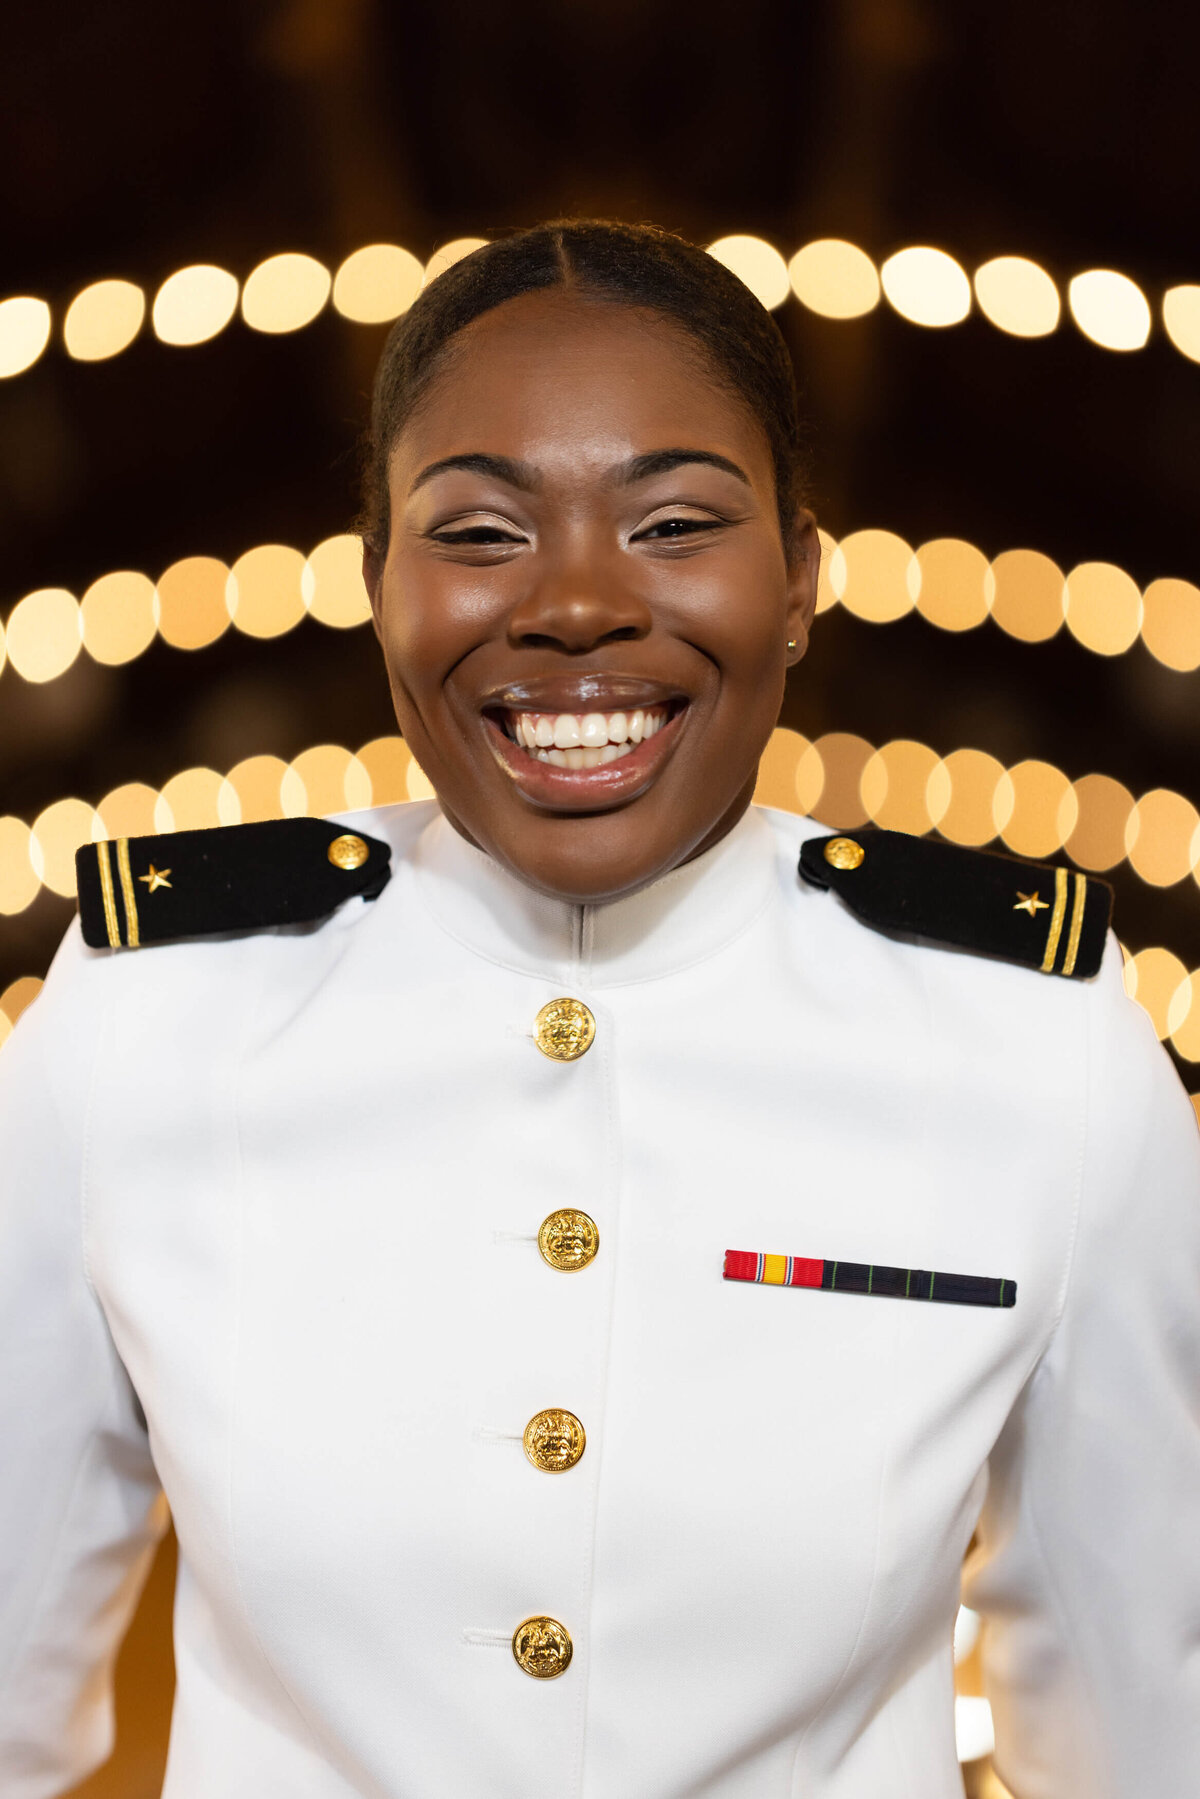 Midshipman Smiling in Senior photos with lights at the Naval Academy.